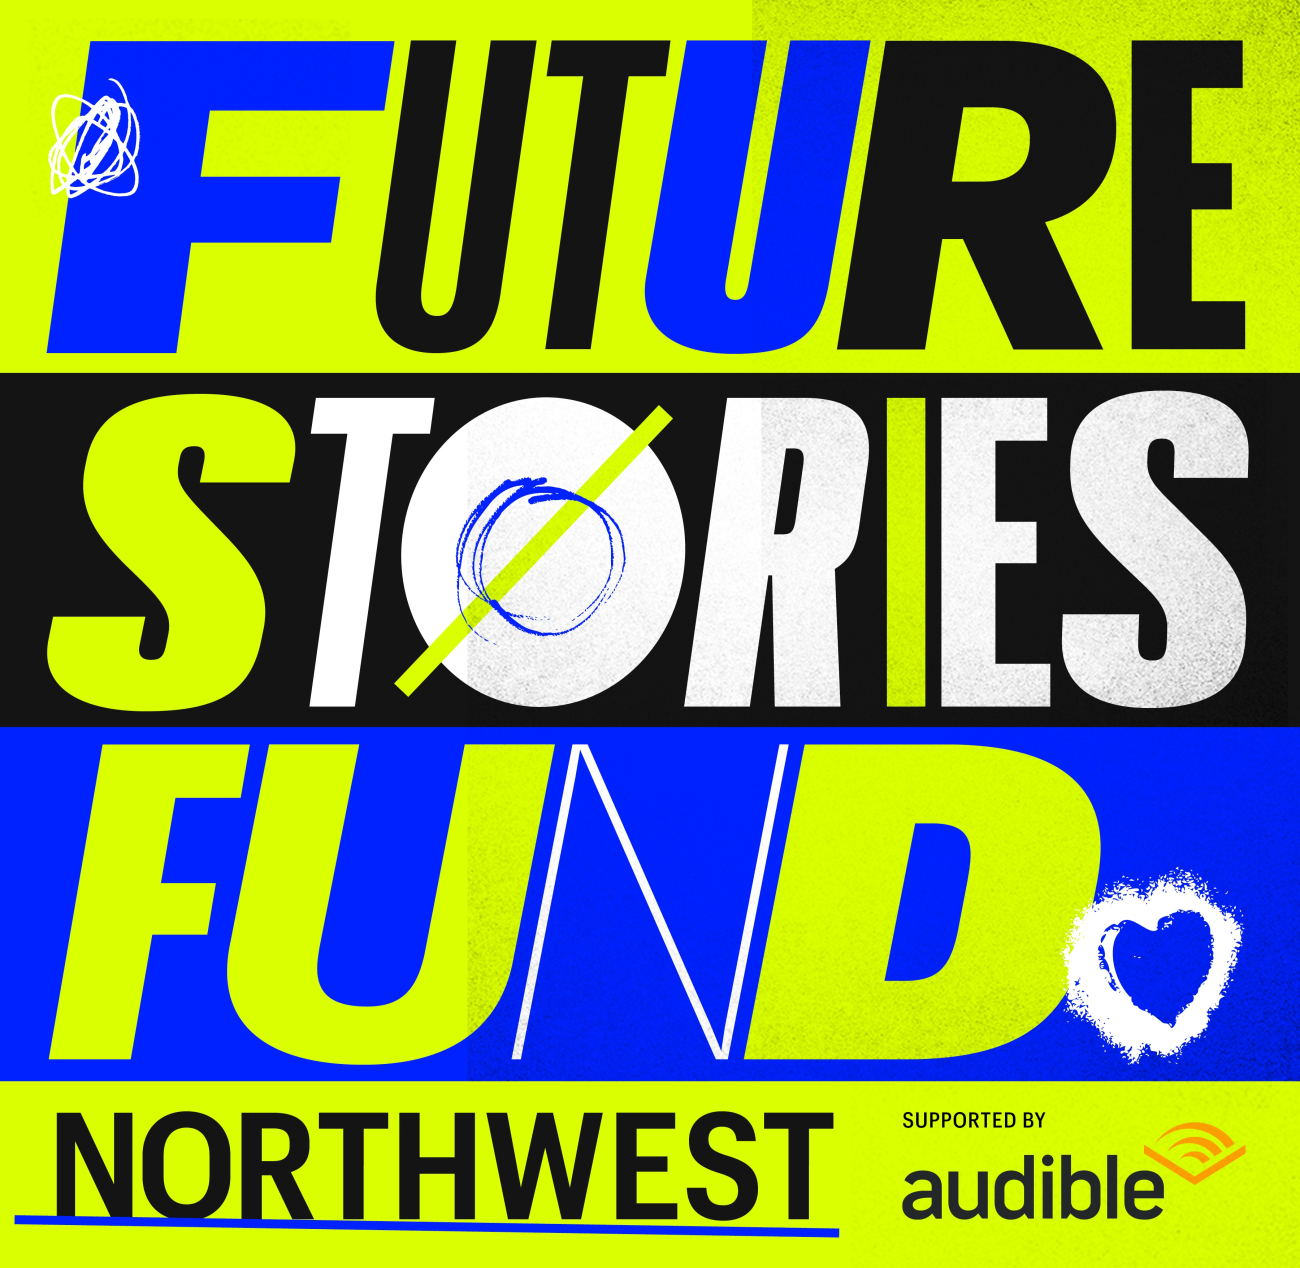 Future stories fund northwest supported by audible